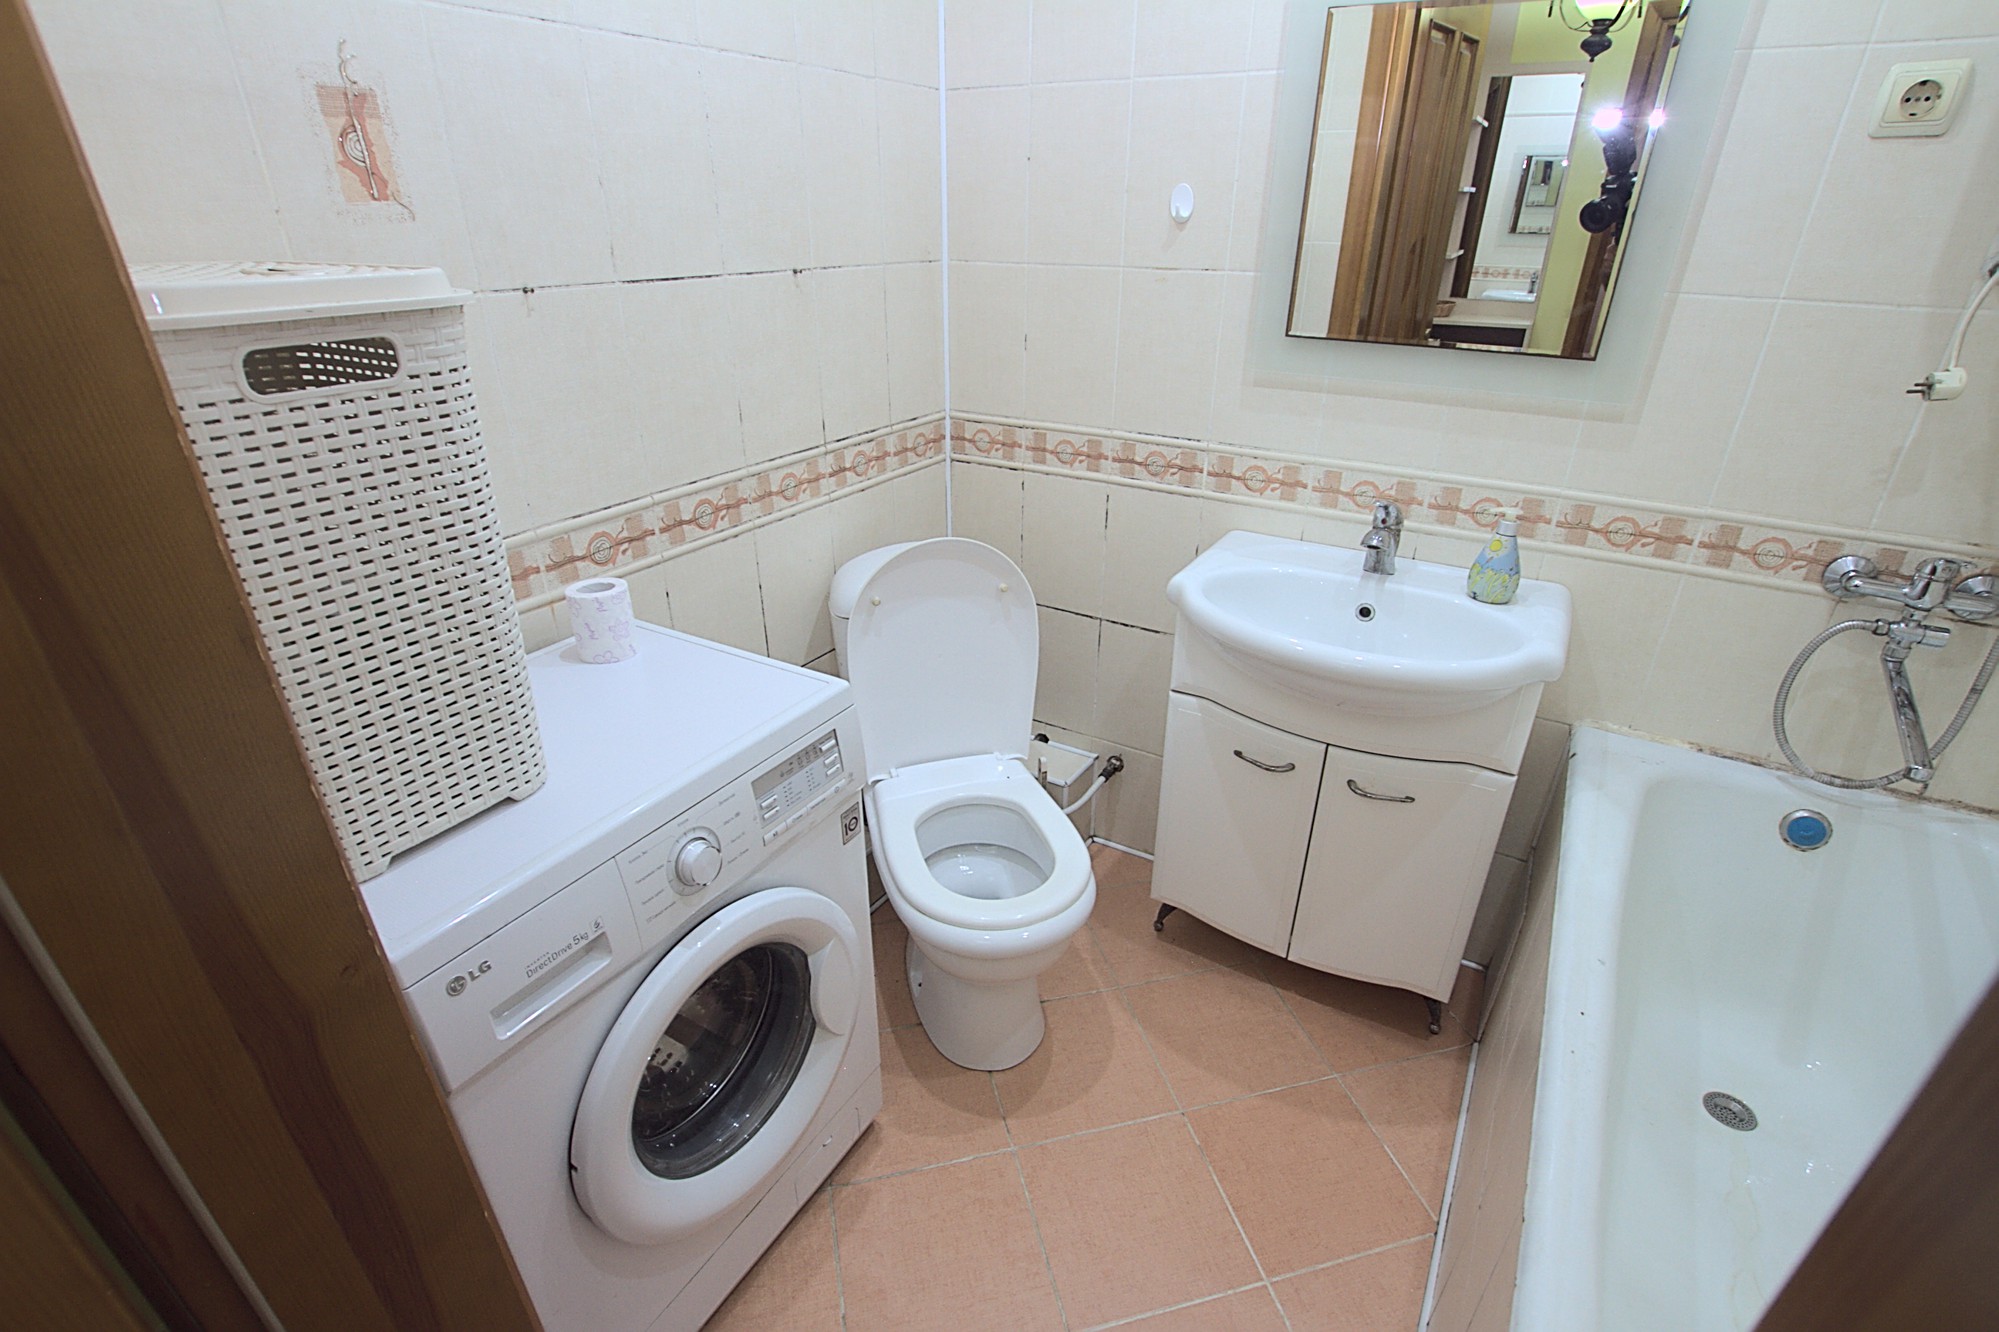 Lavender Apartment  is a 2 rooms apartment for rent in Chisinau, Moldova